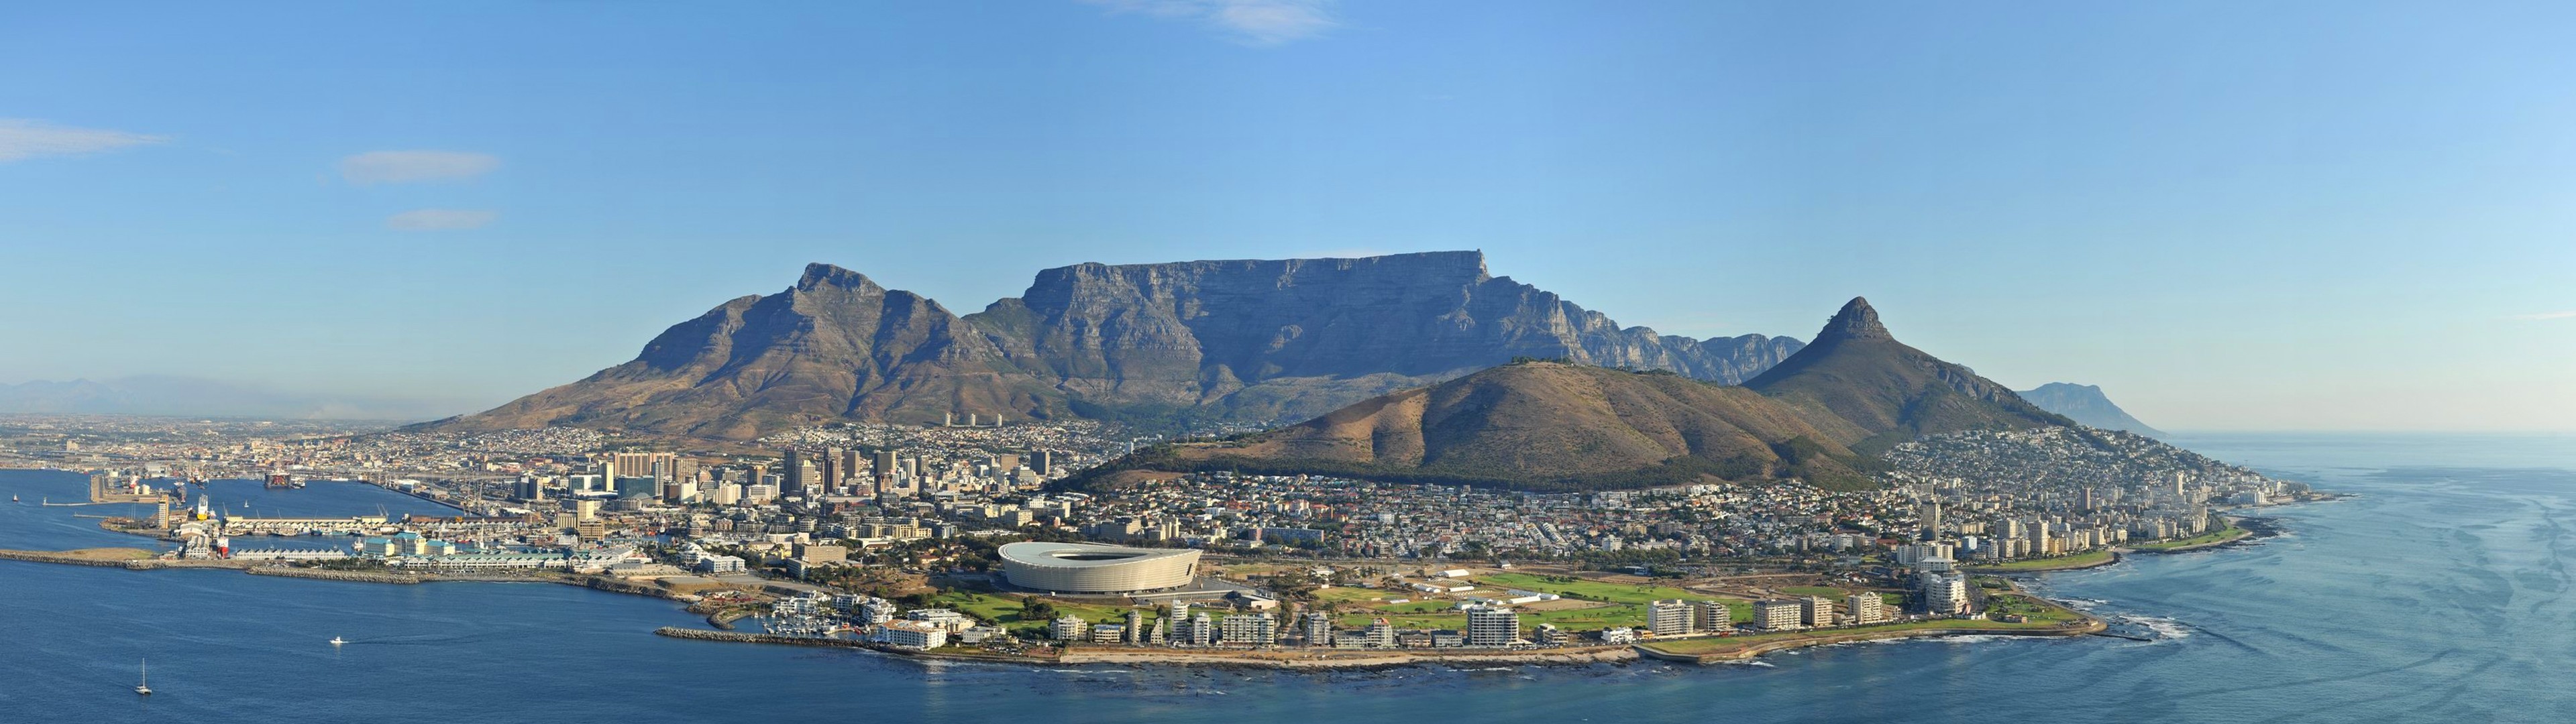 South Africa, Cape Town, Panoramas Wallpaper